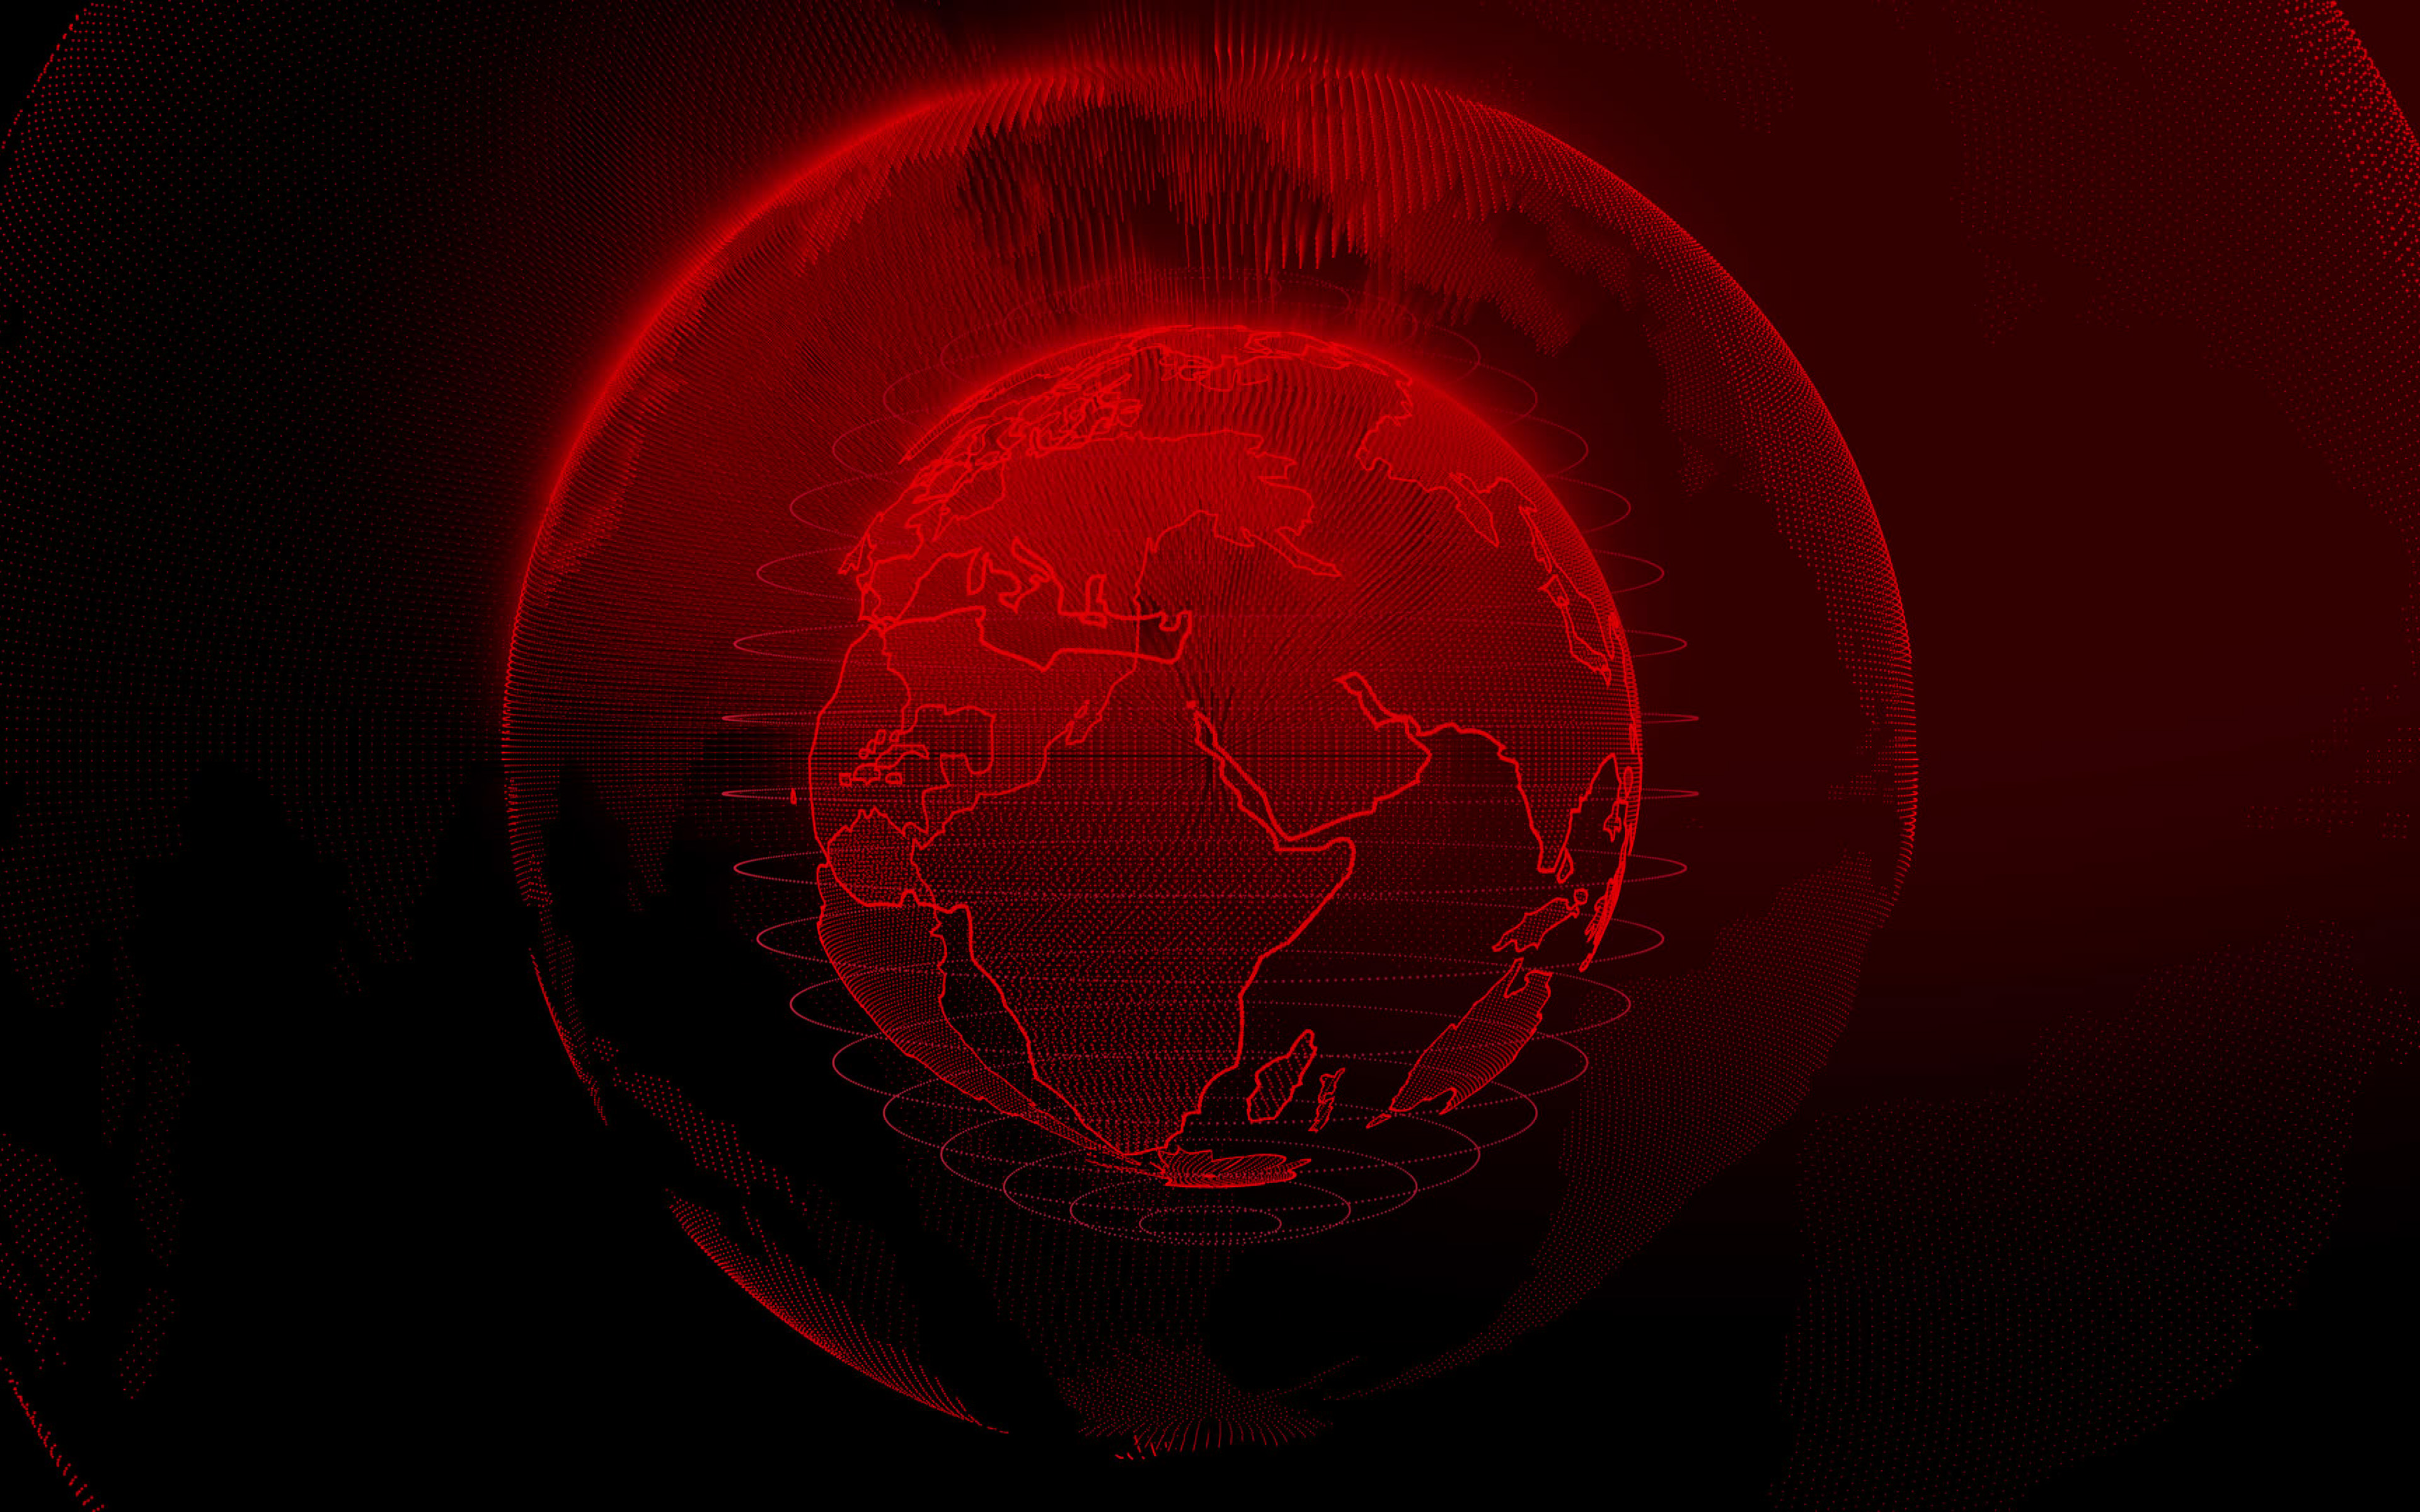 Download wallpaper Red digital globe, Red digital background, technology networks, global networks, dots globe silhouette, digital technology, Red technology background, world map for desktop with resolution 3840x2400. High Quality HD picture wallpaper